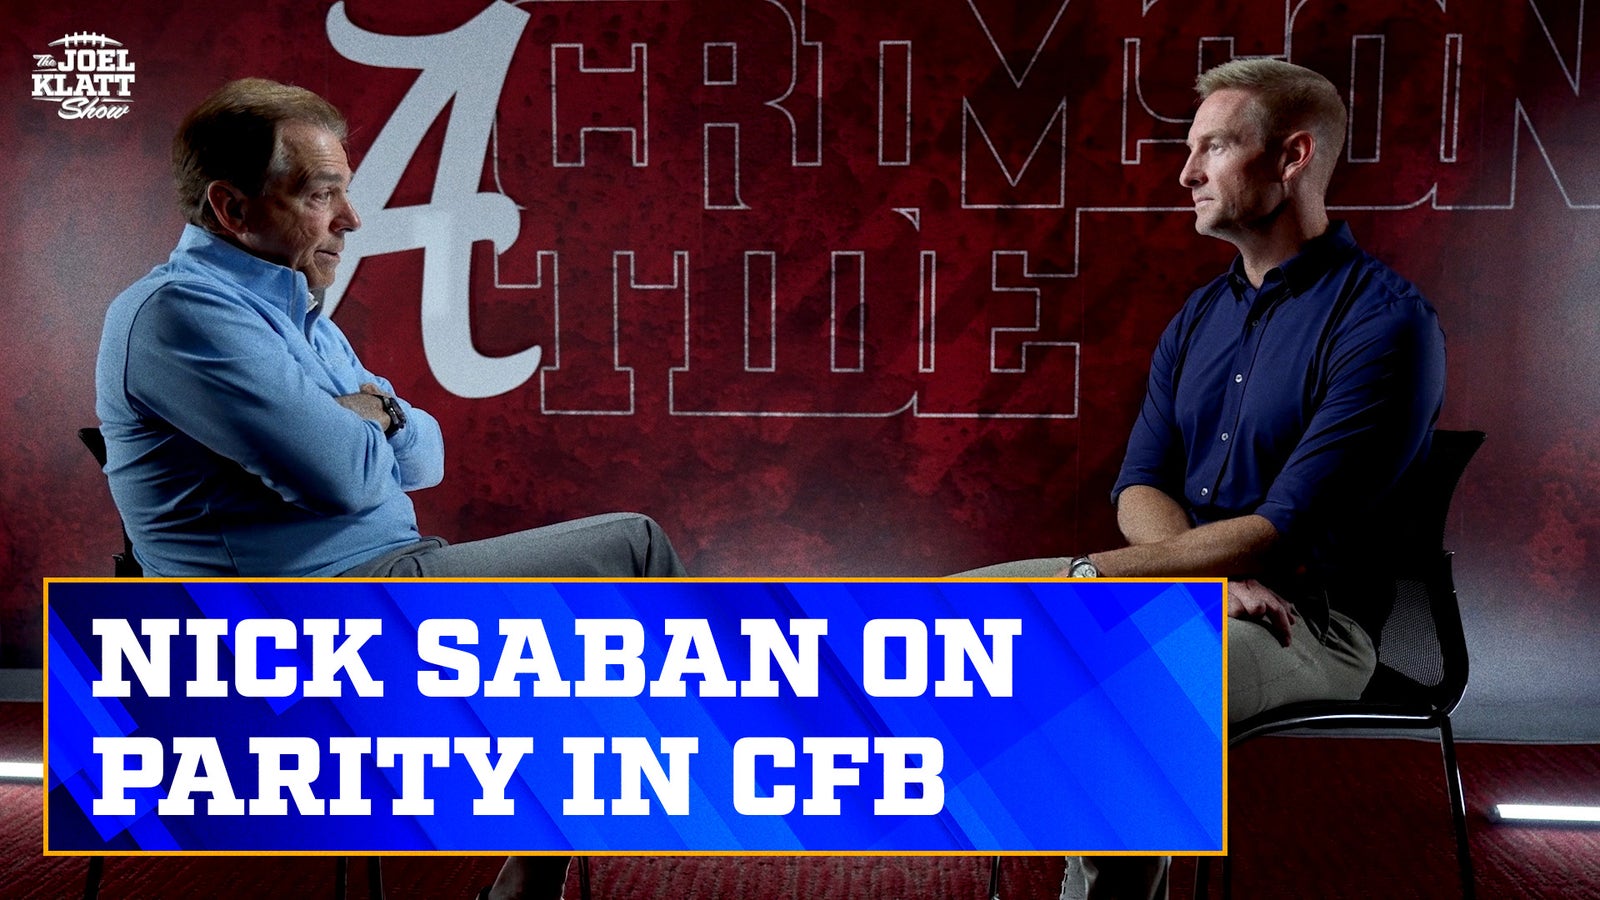 Nick Saban on whether the expanded playoff will lead to more parity